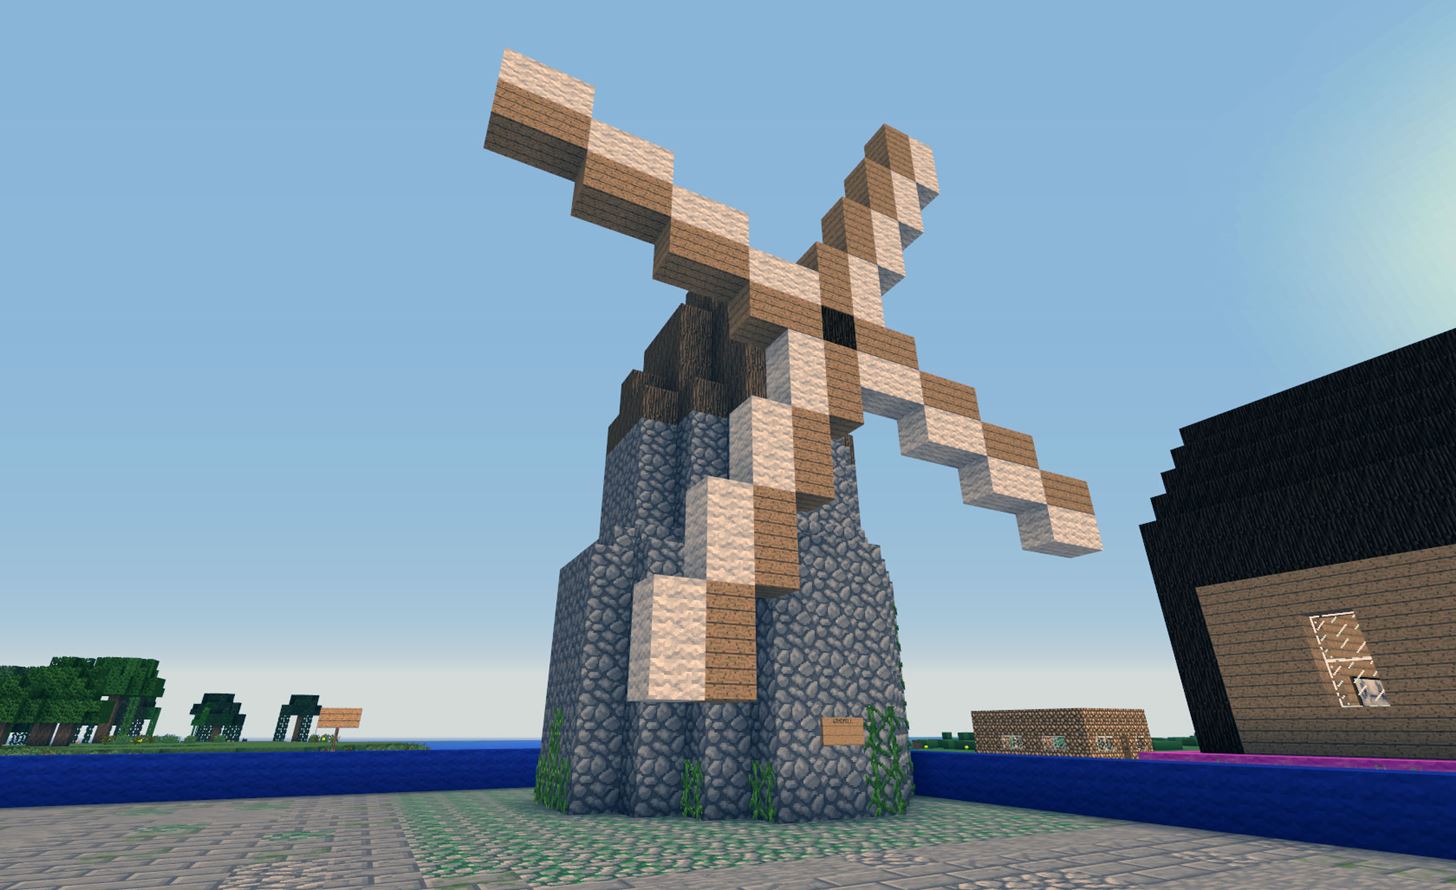 Minecraft World's Weekly Server Challenge: Buildings Throughout Time #2